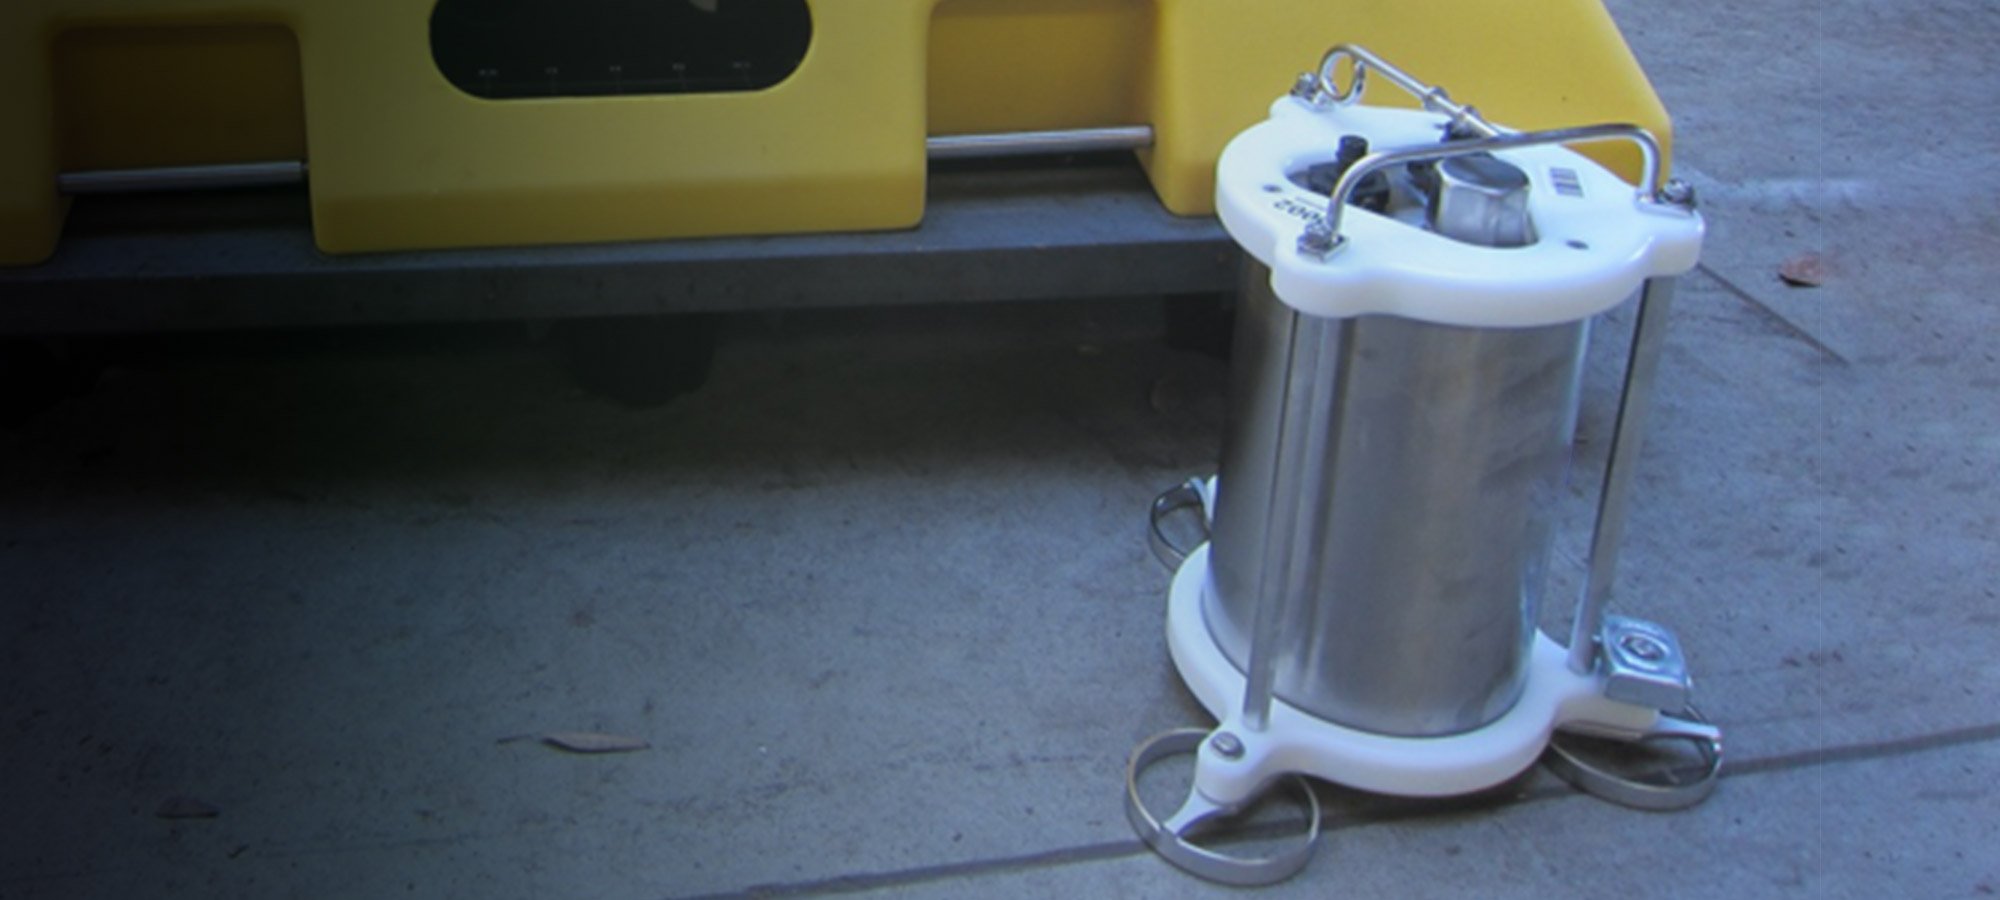 Stainless steel Trillium Compact OBS seismometer sitting on the deck of a ship beside an Abalones